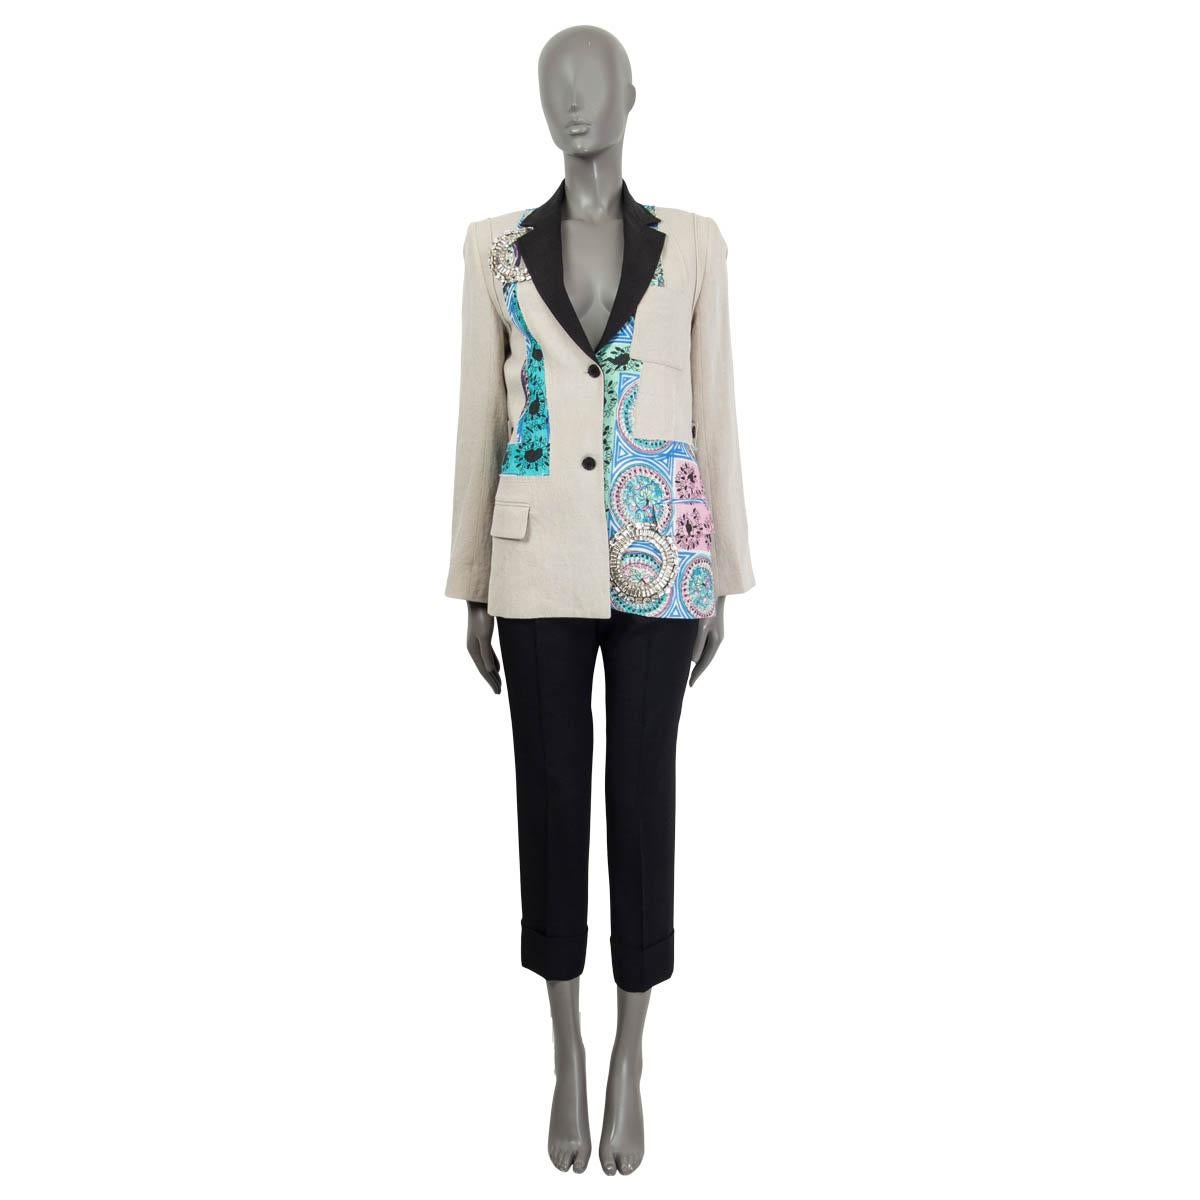 100% authentic JW Anderson Mystic Paisley blazer in beige linen (100%) with asymmetric patchwork panels in multicolor paisley. Features buttoned cuffs, a chest pocket and two flap pockets on the front. Has a detachable belt at the back and two